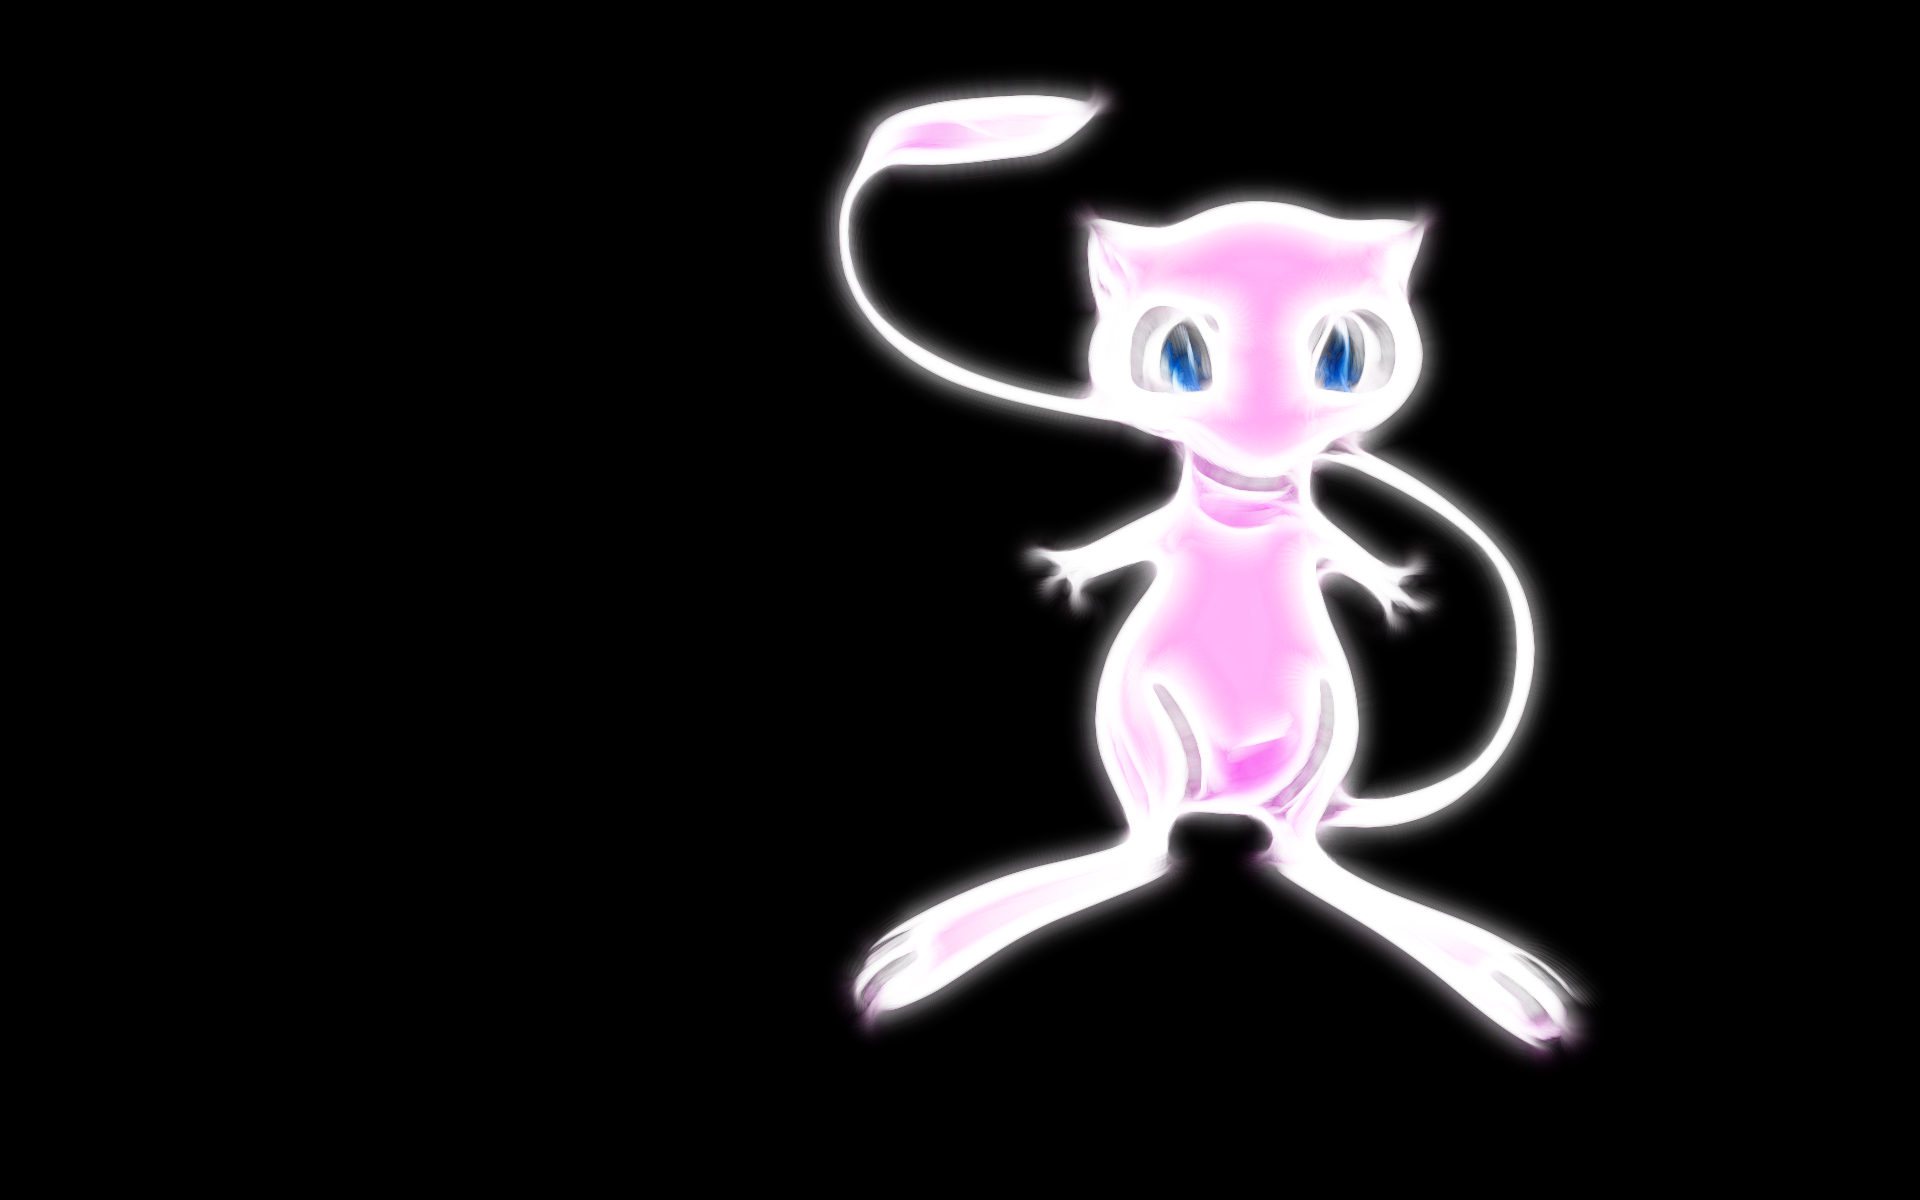 Pokemon Mew Wallpaper Images amp Pictures   Becuo